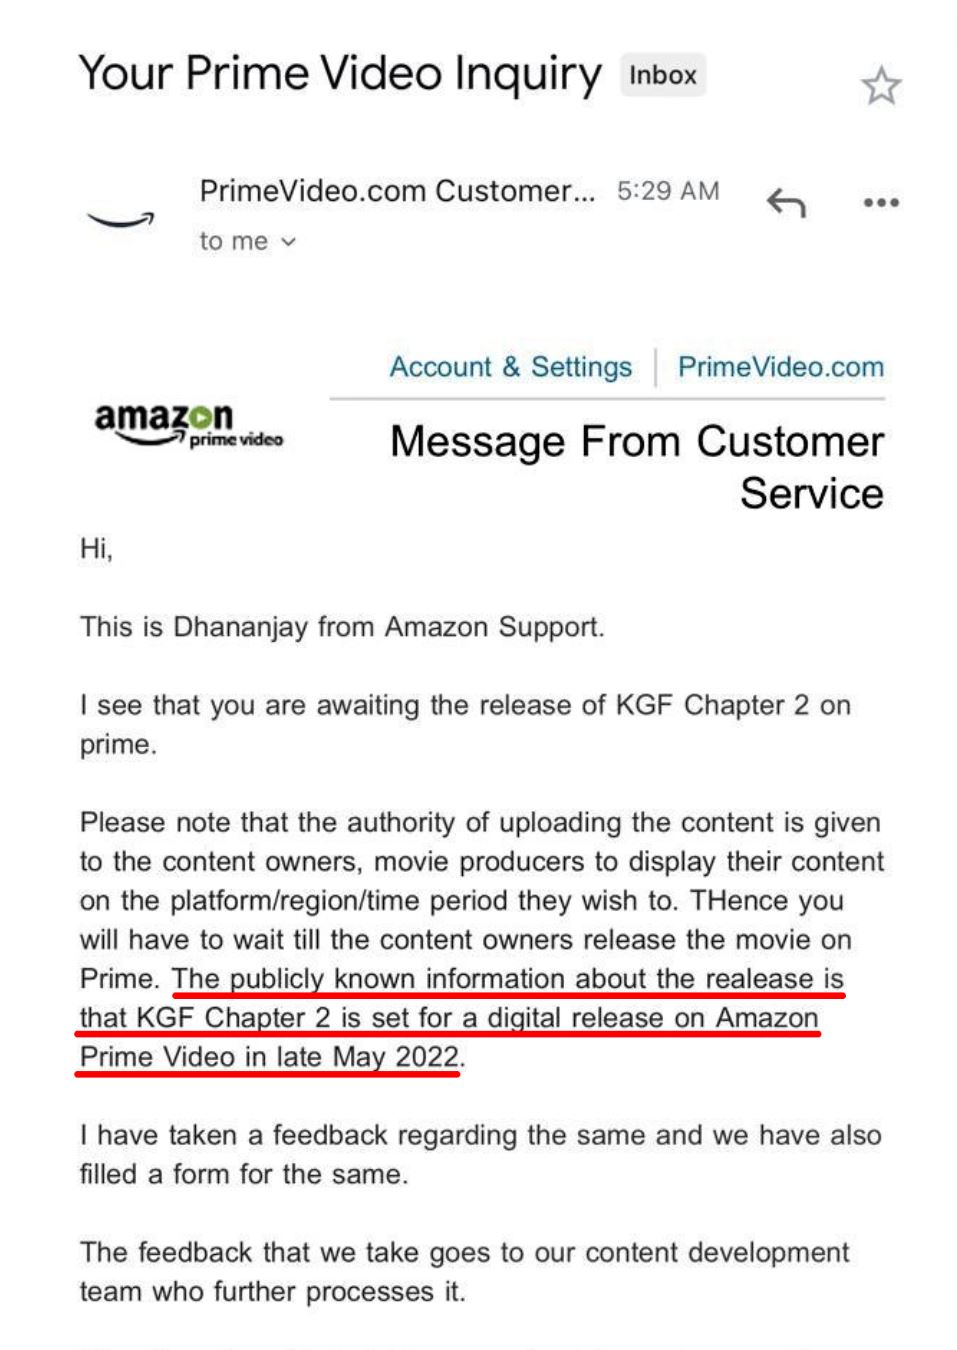 KGF Prime Video email